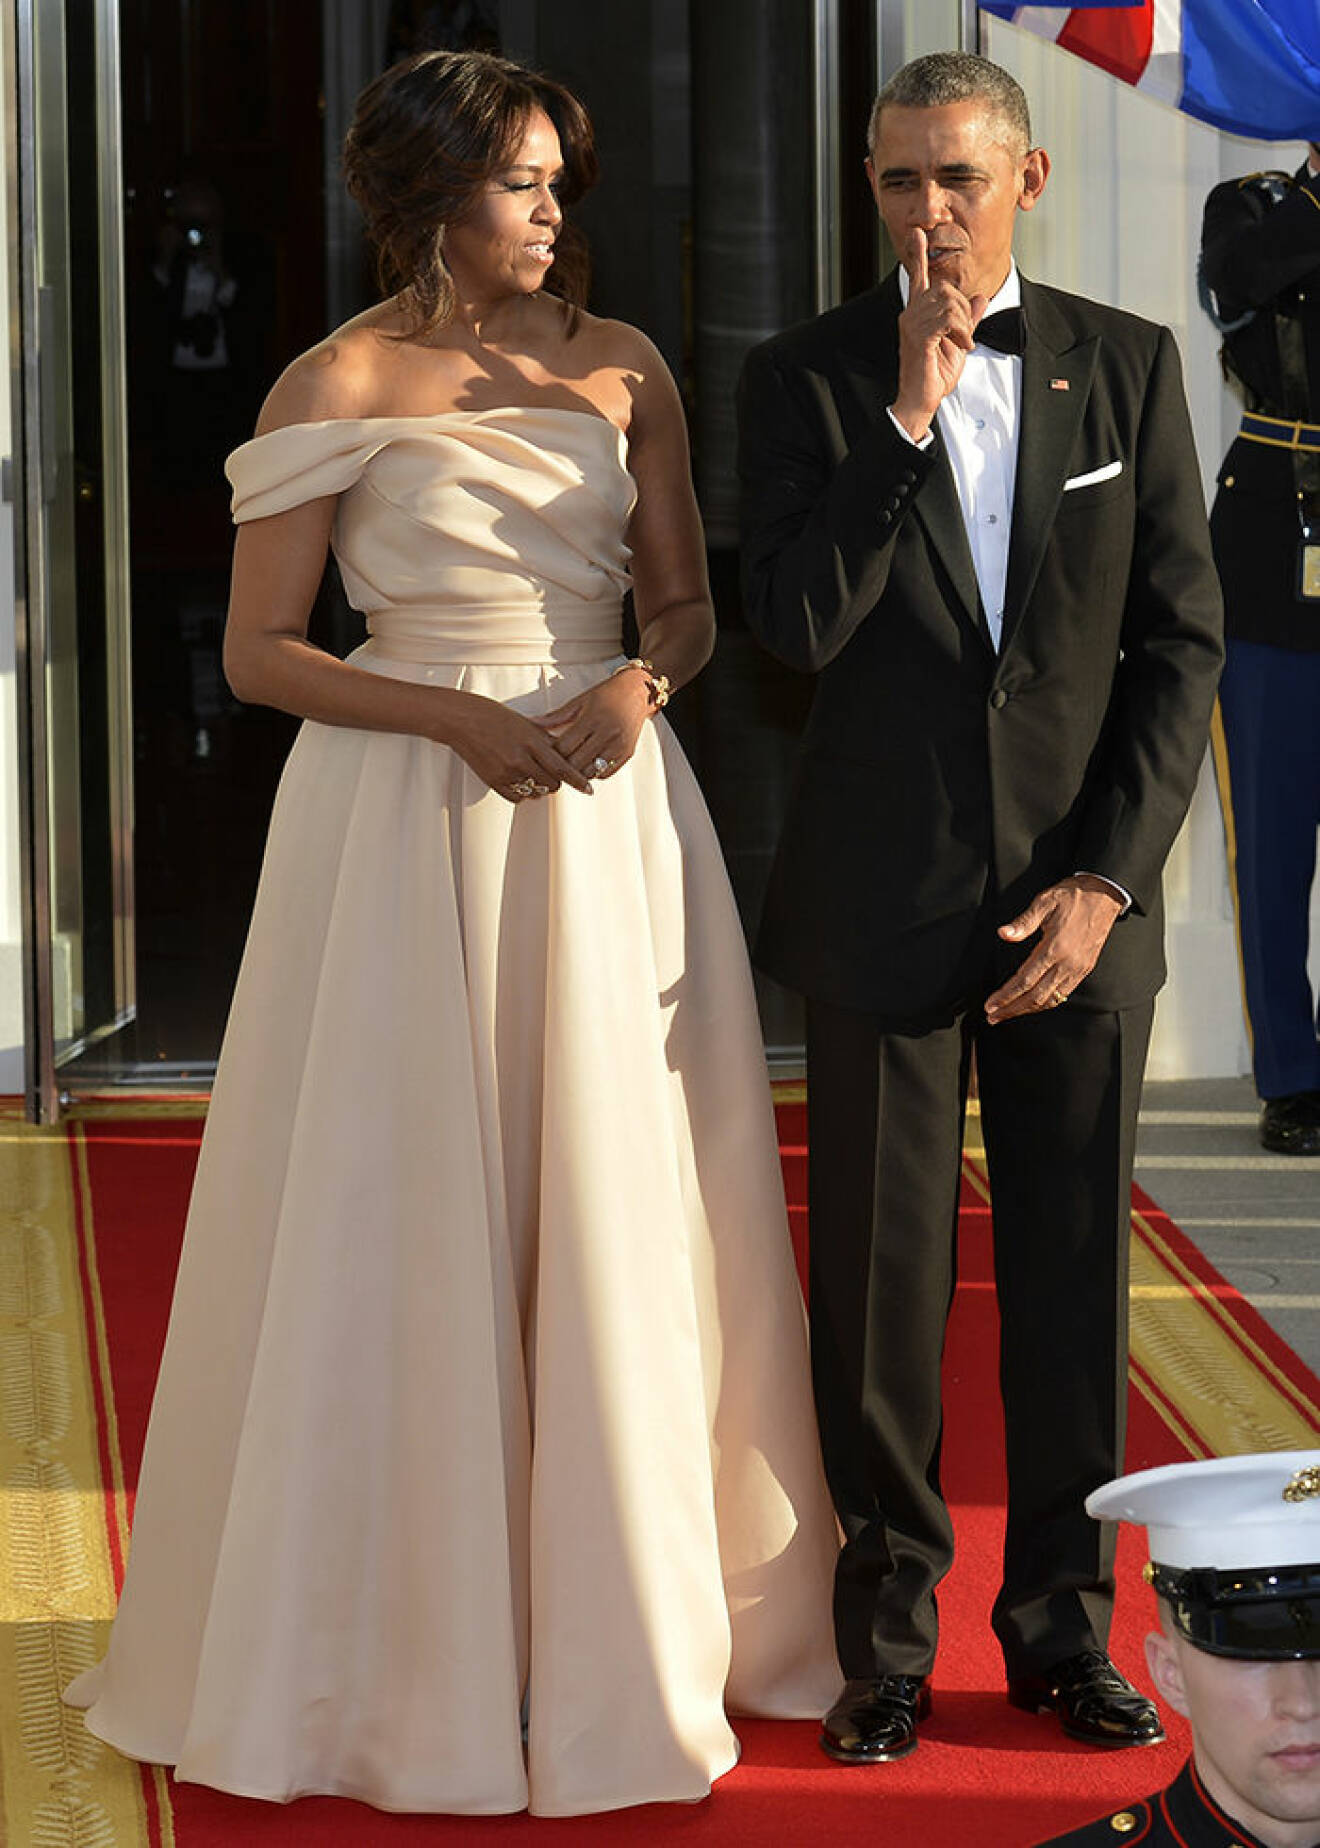 U.S. President Barack Obama gestures a whisper as he and First Lady Michelle Obama await the arrival of leaders from the five Nordic countries for a State Dinner WEARING NAEEM KHAN